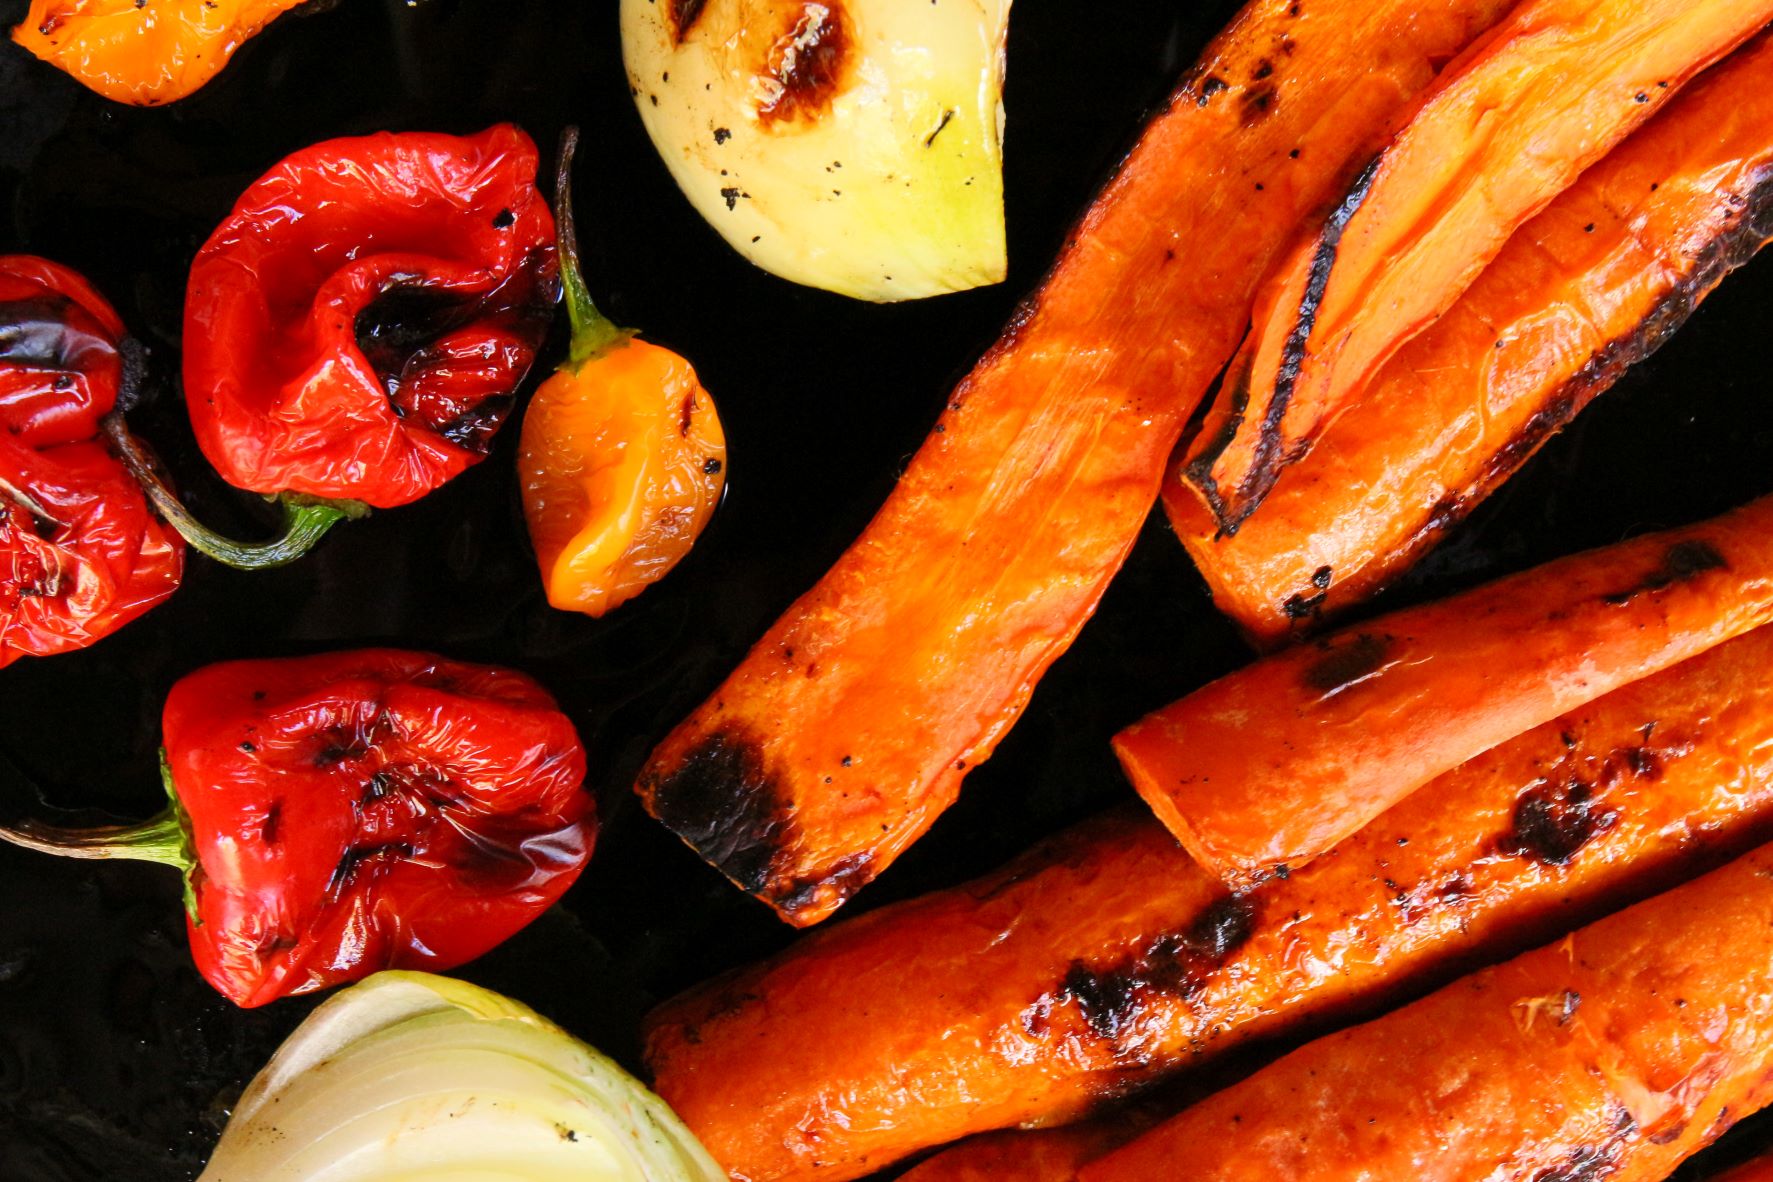 Grilled Vegetables for my Grilled Habanero Hot Sauce